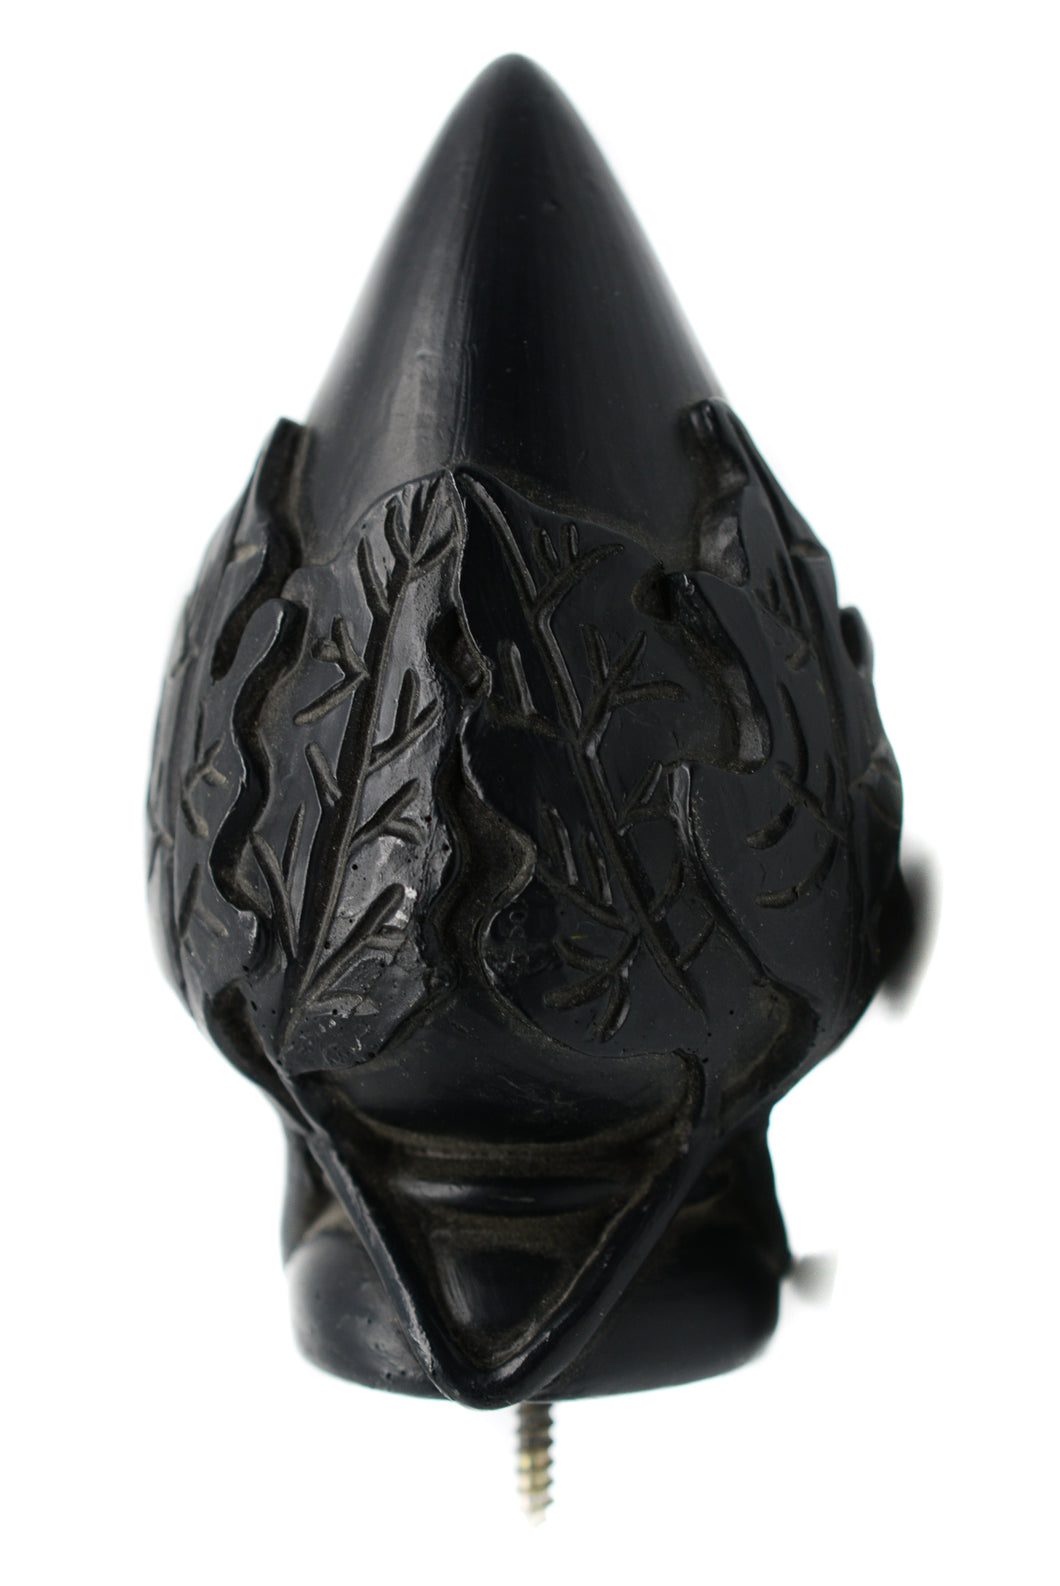 Selene Finial: Product Number 659